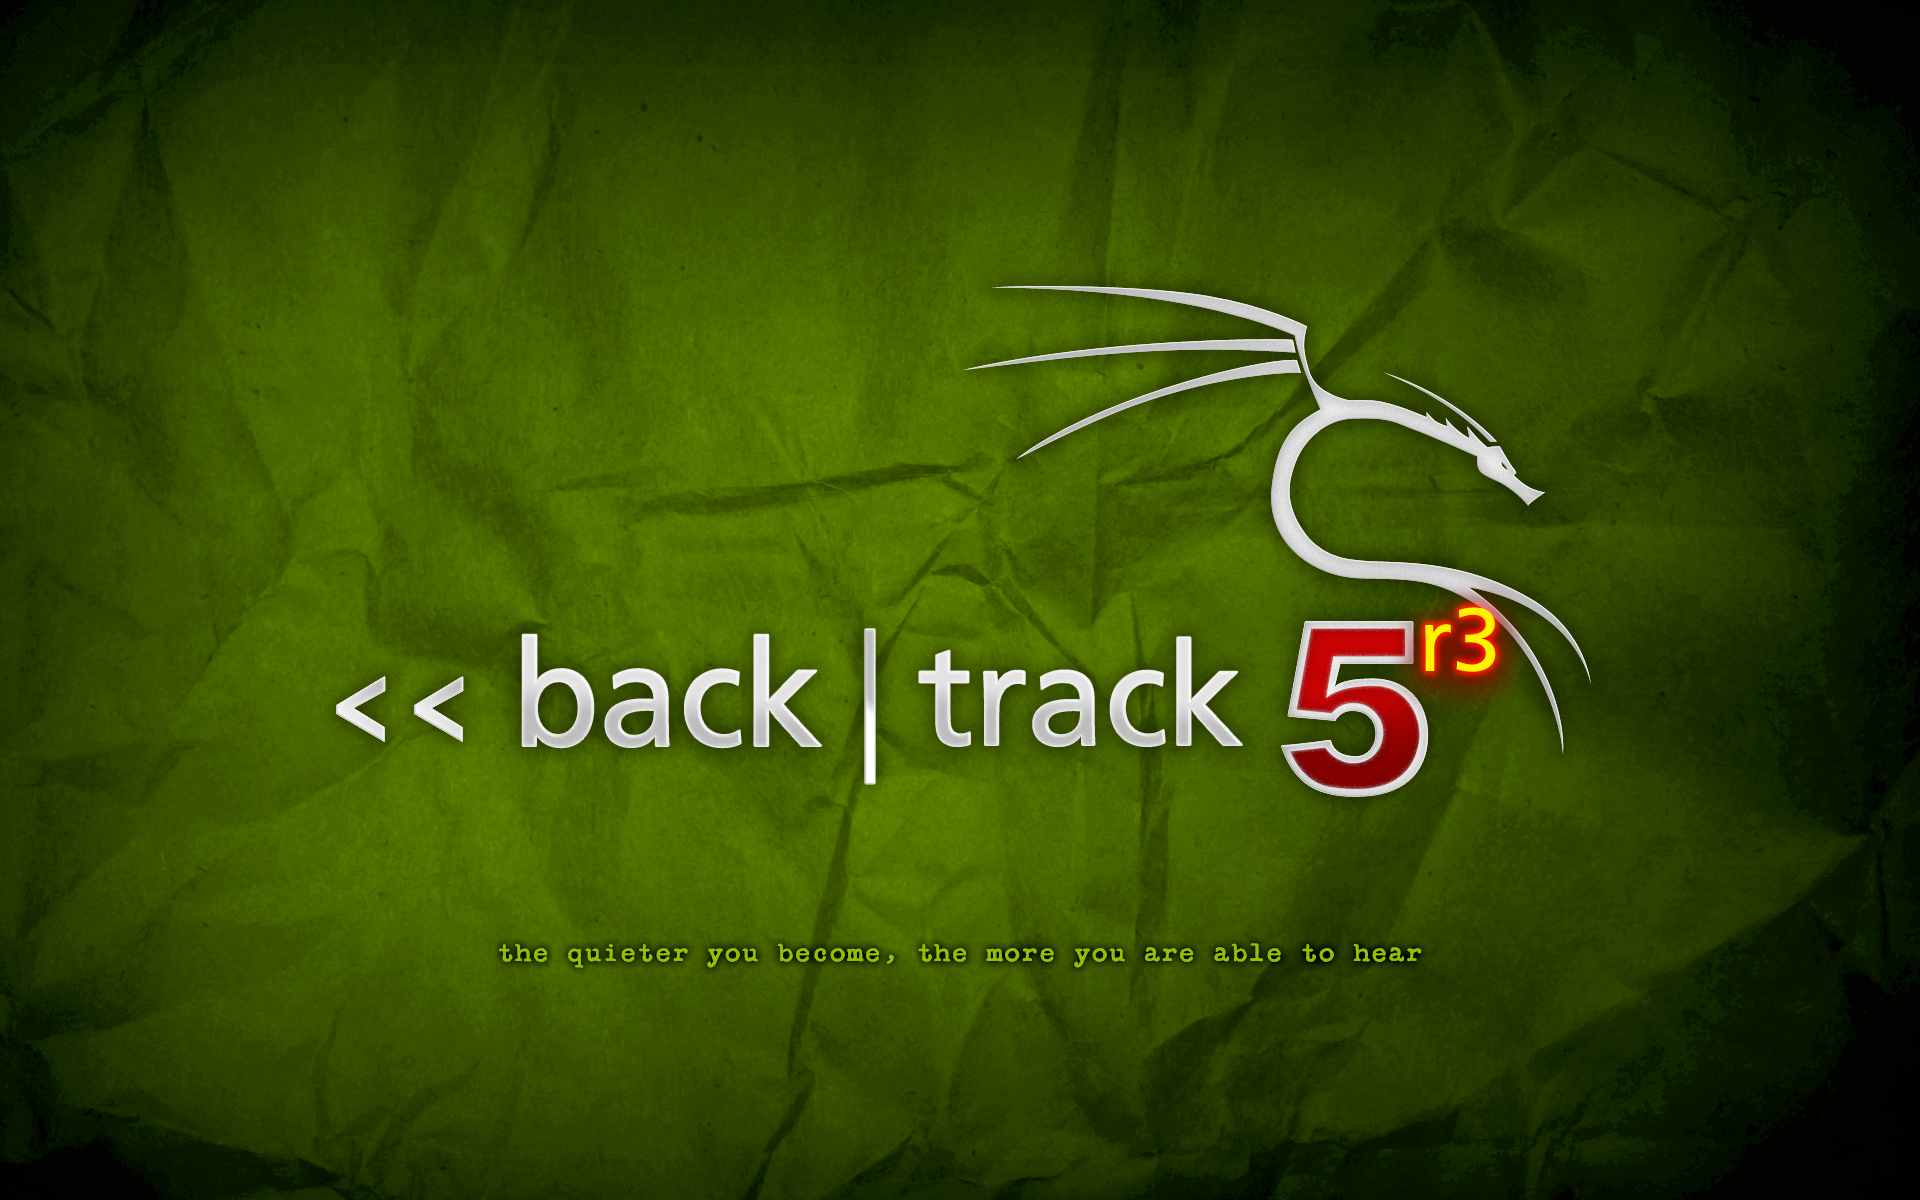 backtrack-5r3-lime.png